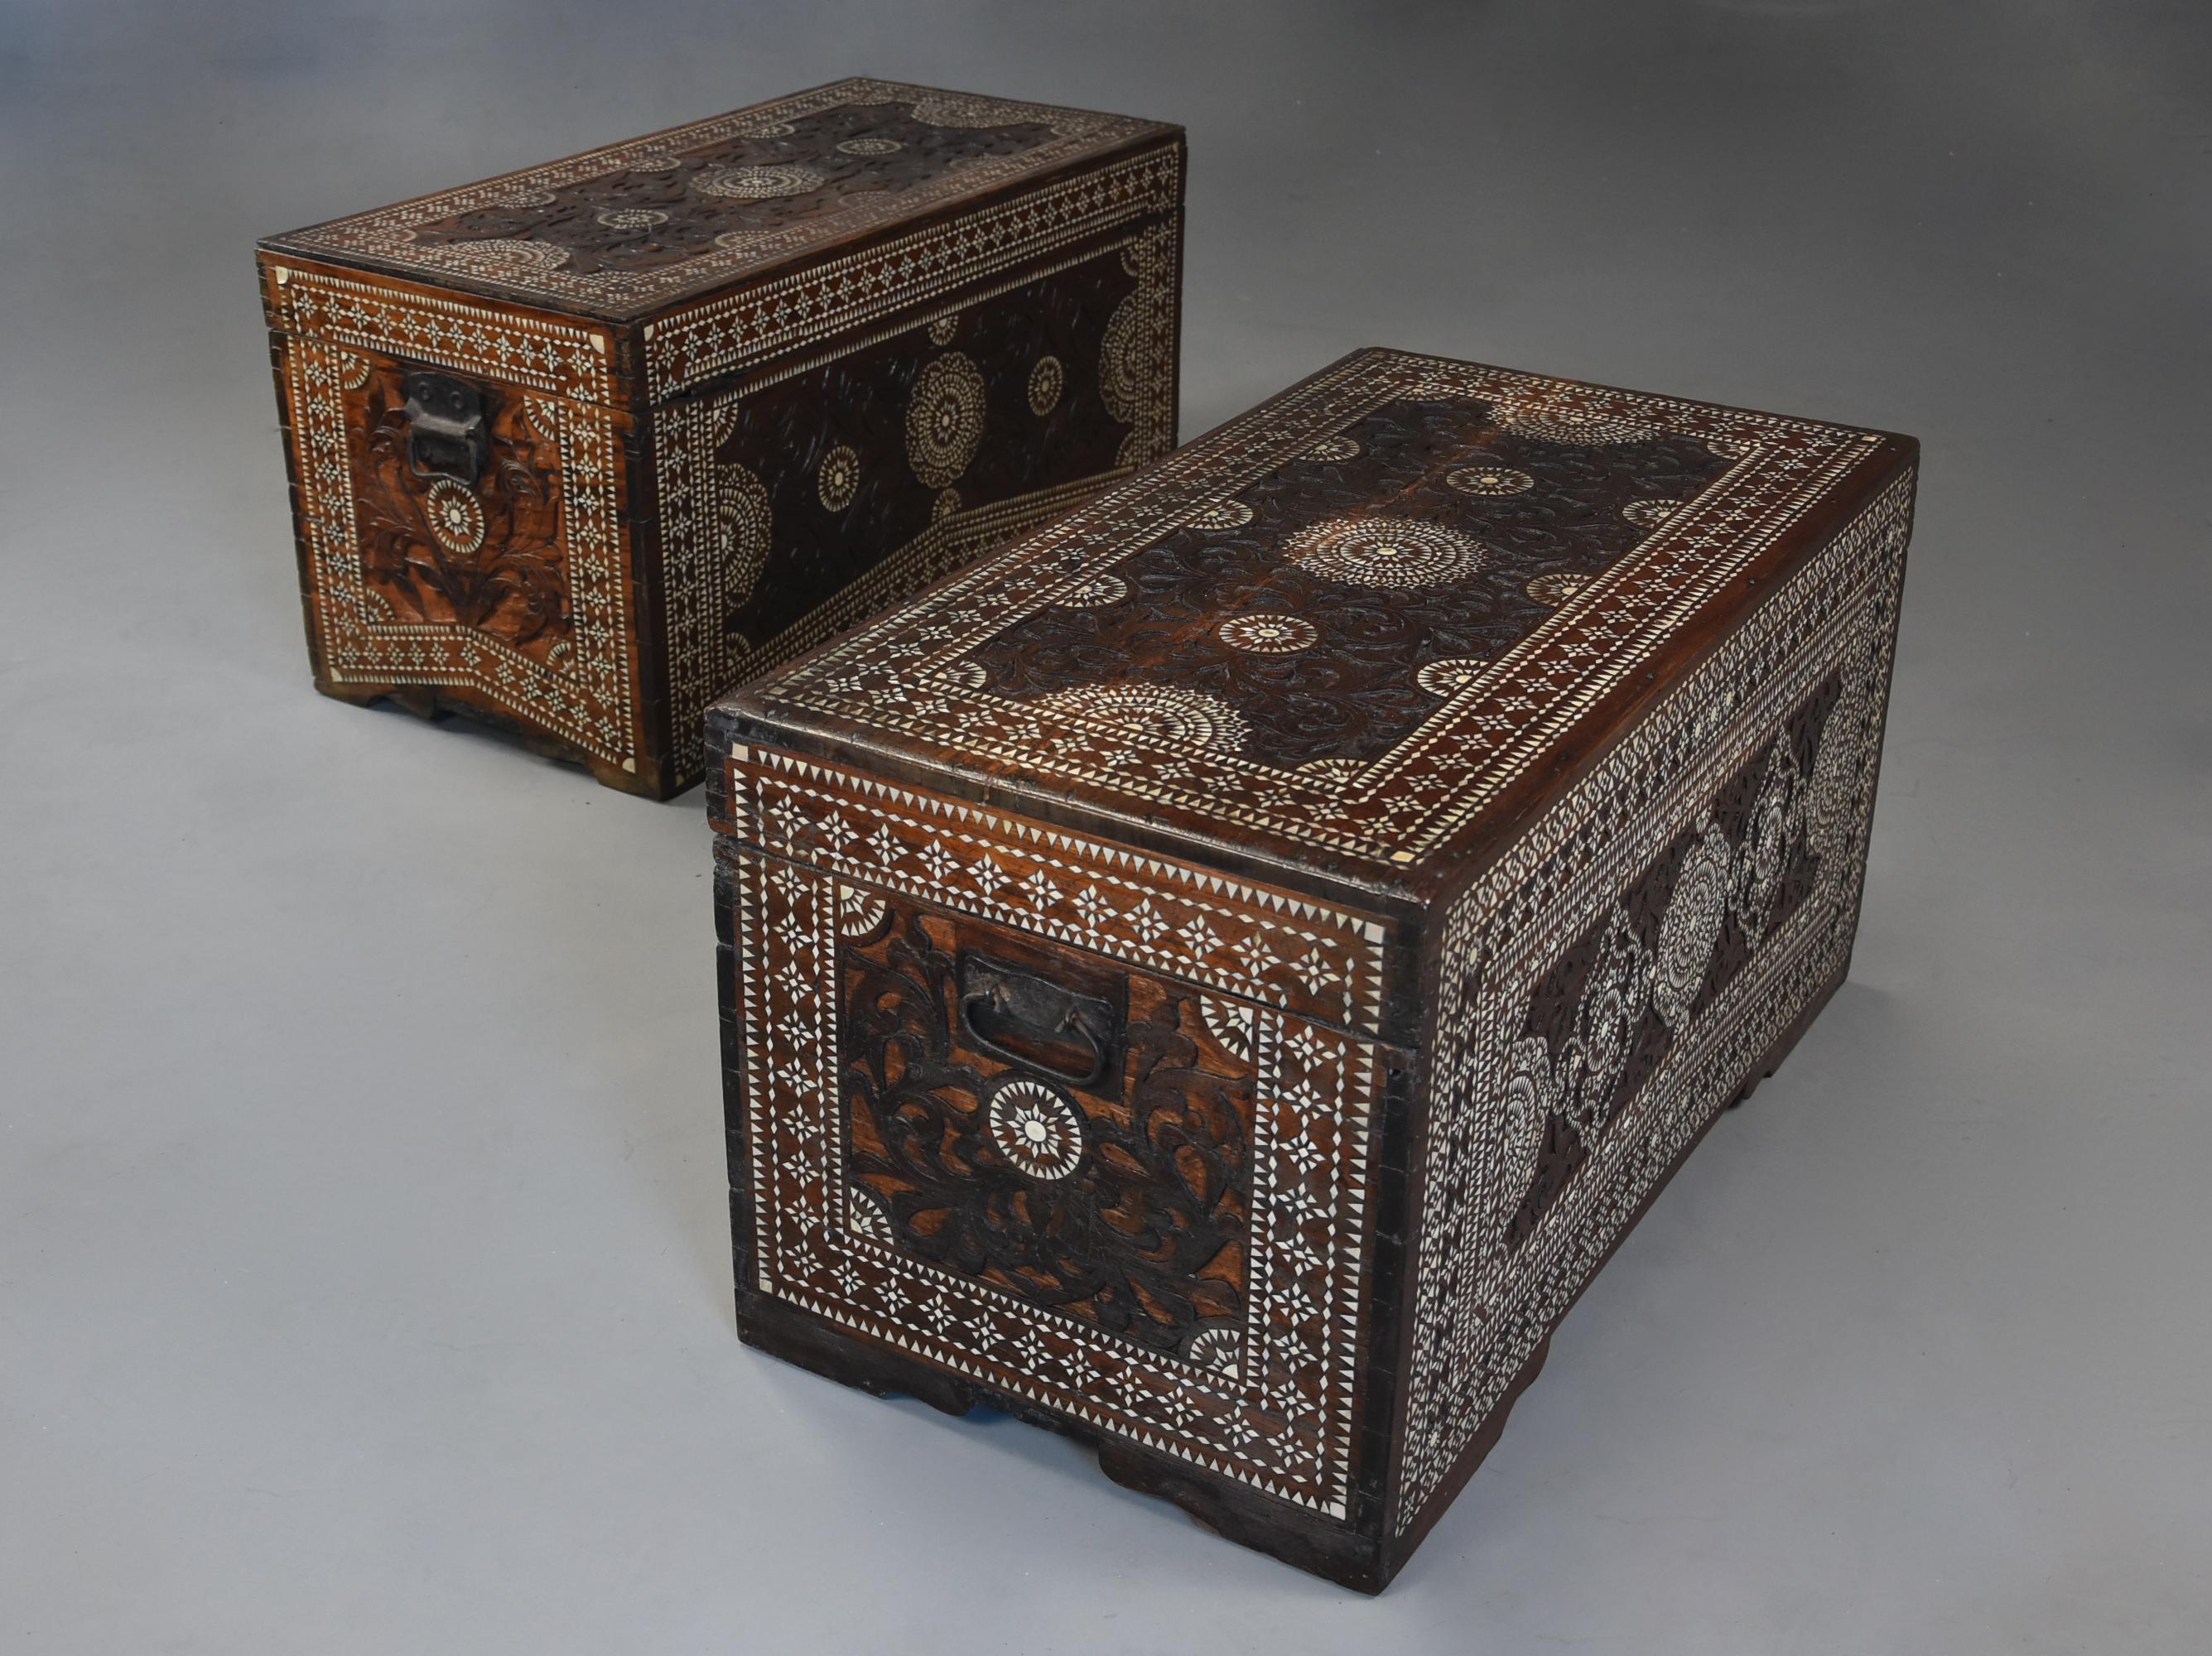 Highly decorative near pair of early 20th century hardwood and mother of pearl Syrian trunks or chests.

The trunks consist of foliate carved tops with inlaid mother of pearl circle decoration with a border of geometric designs.

The foliate